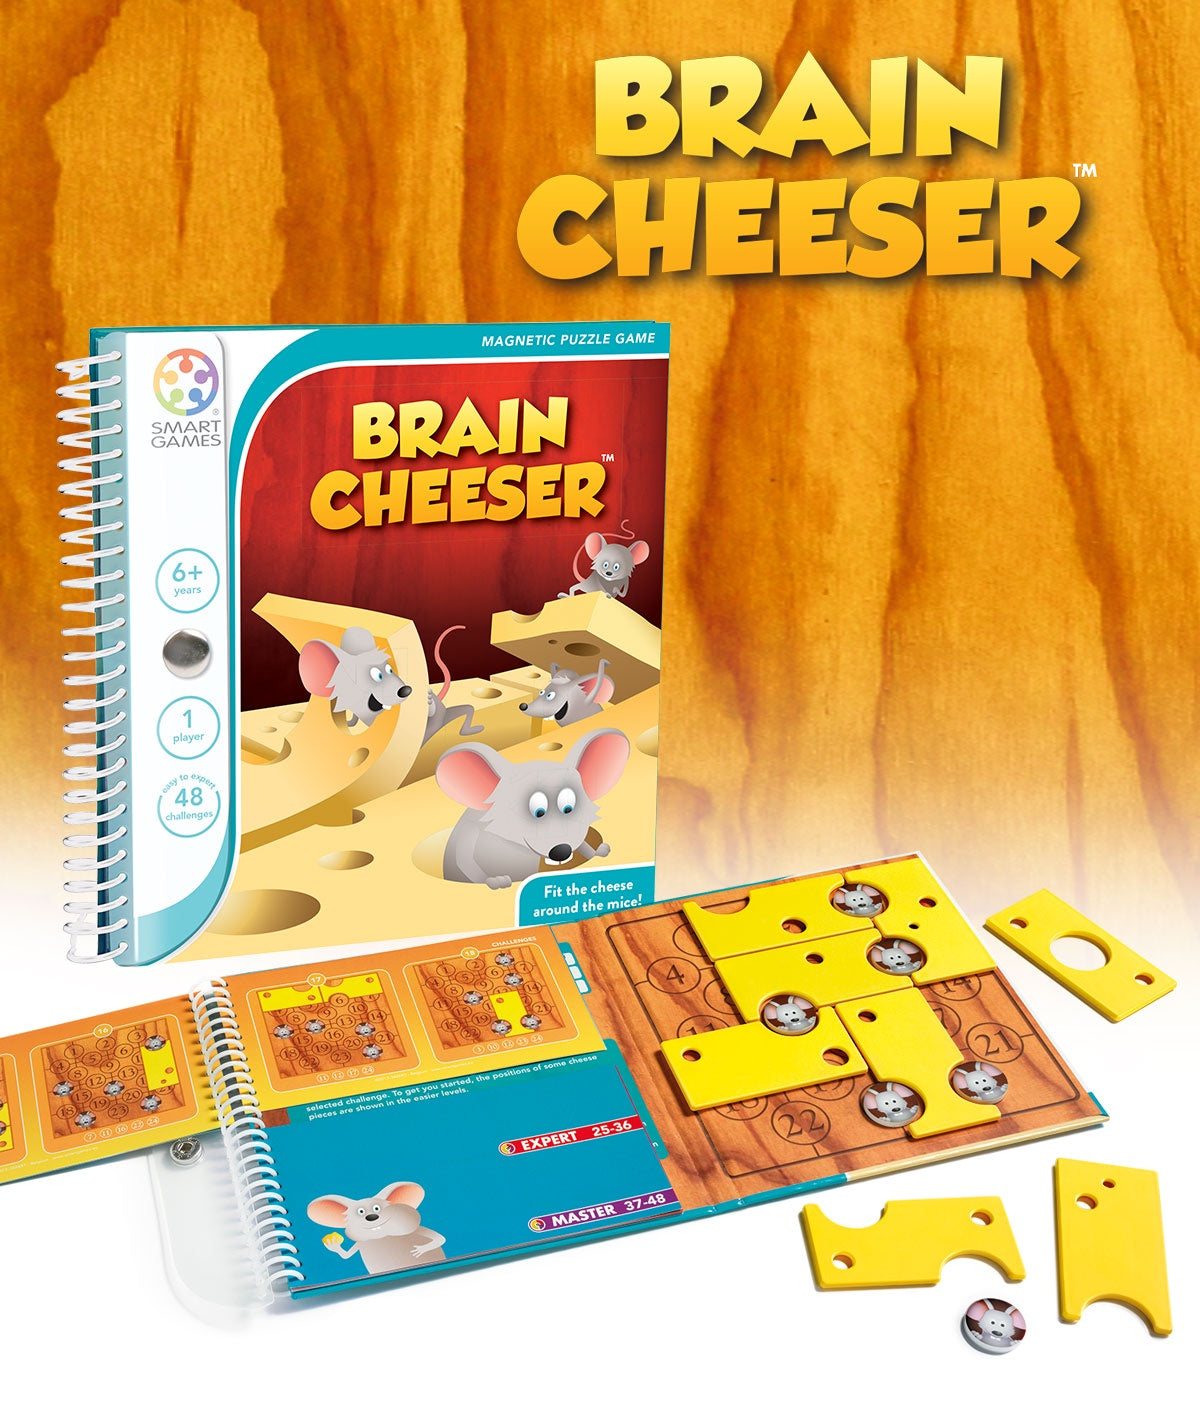 SMART GAMES - Magnetic Travel Game - Brain Cheeser